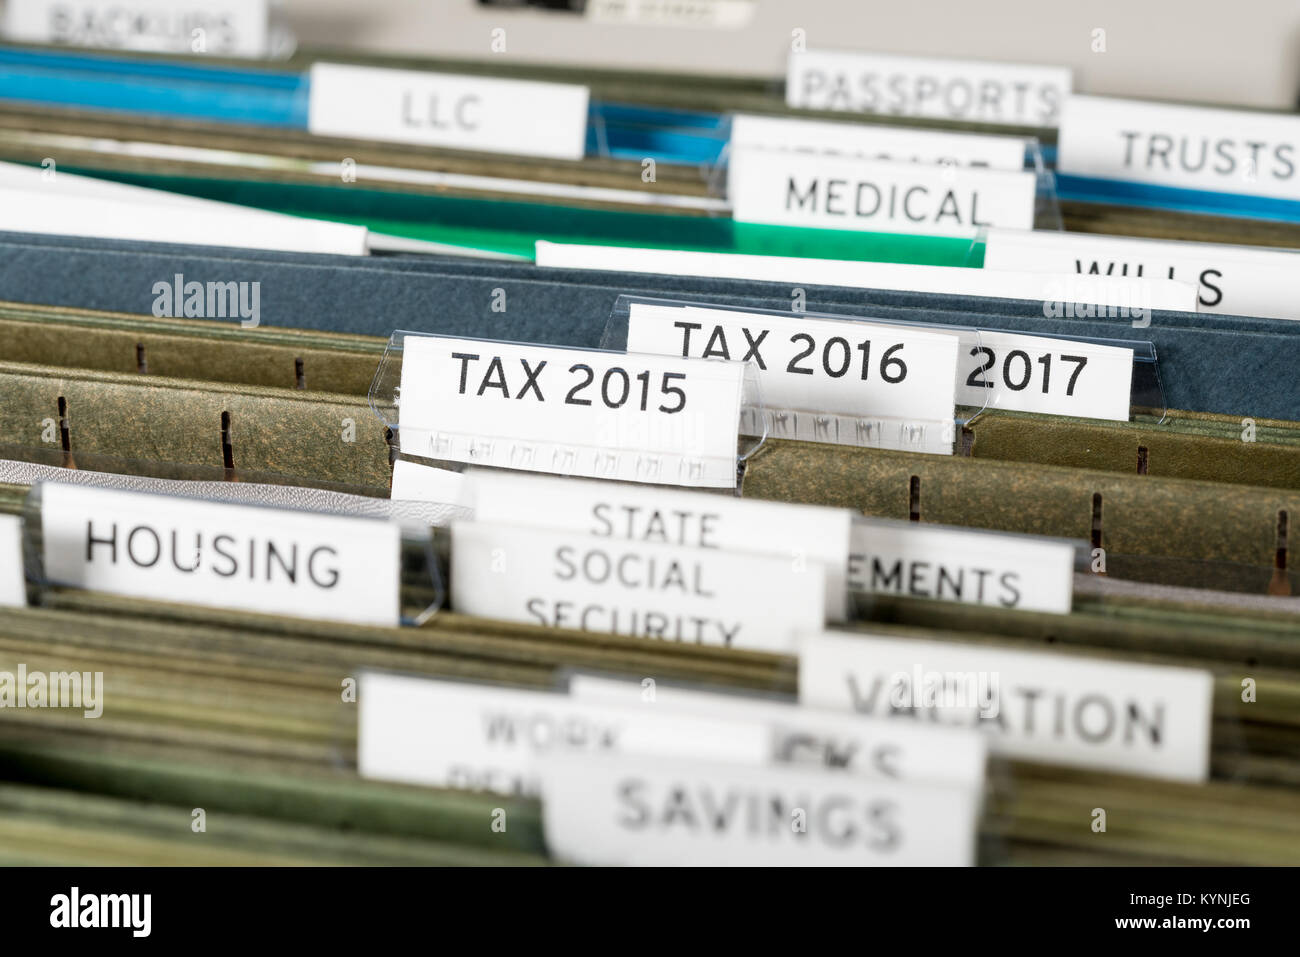 Home filing system for taxes organized in folders Stock Photo